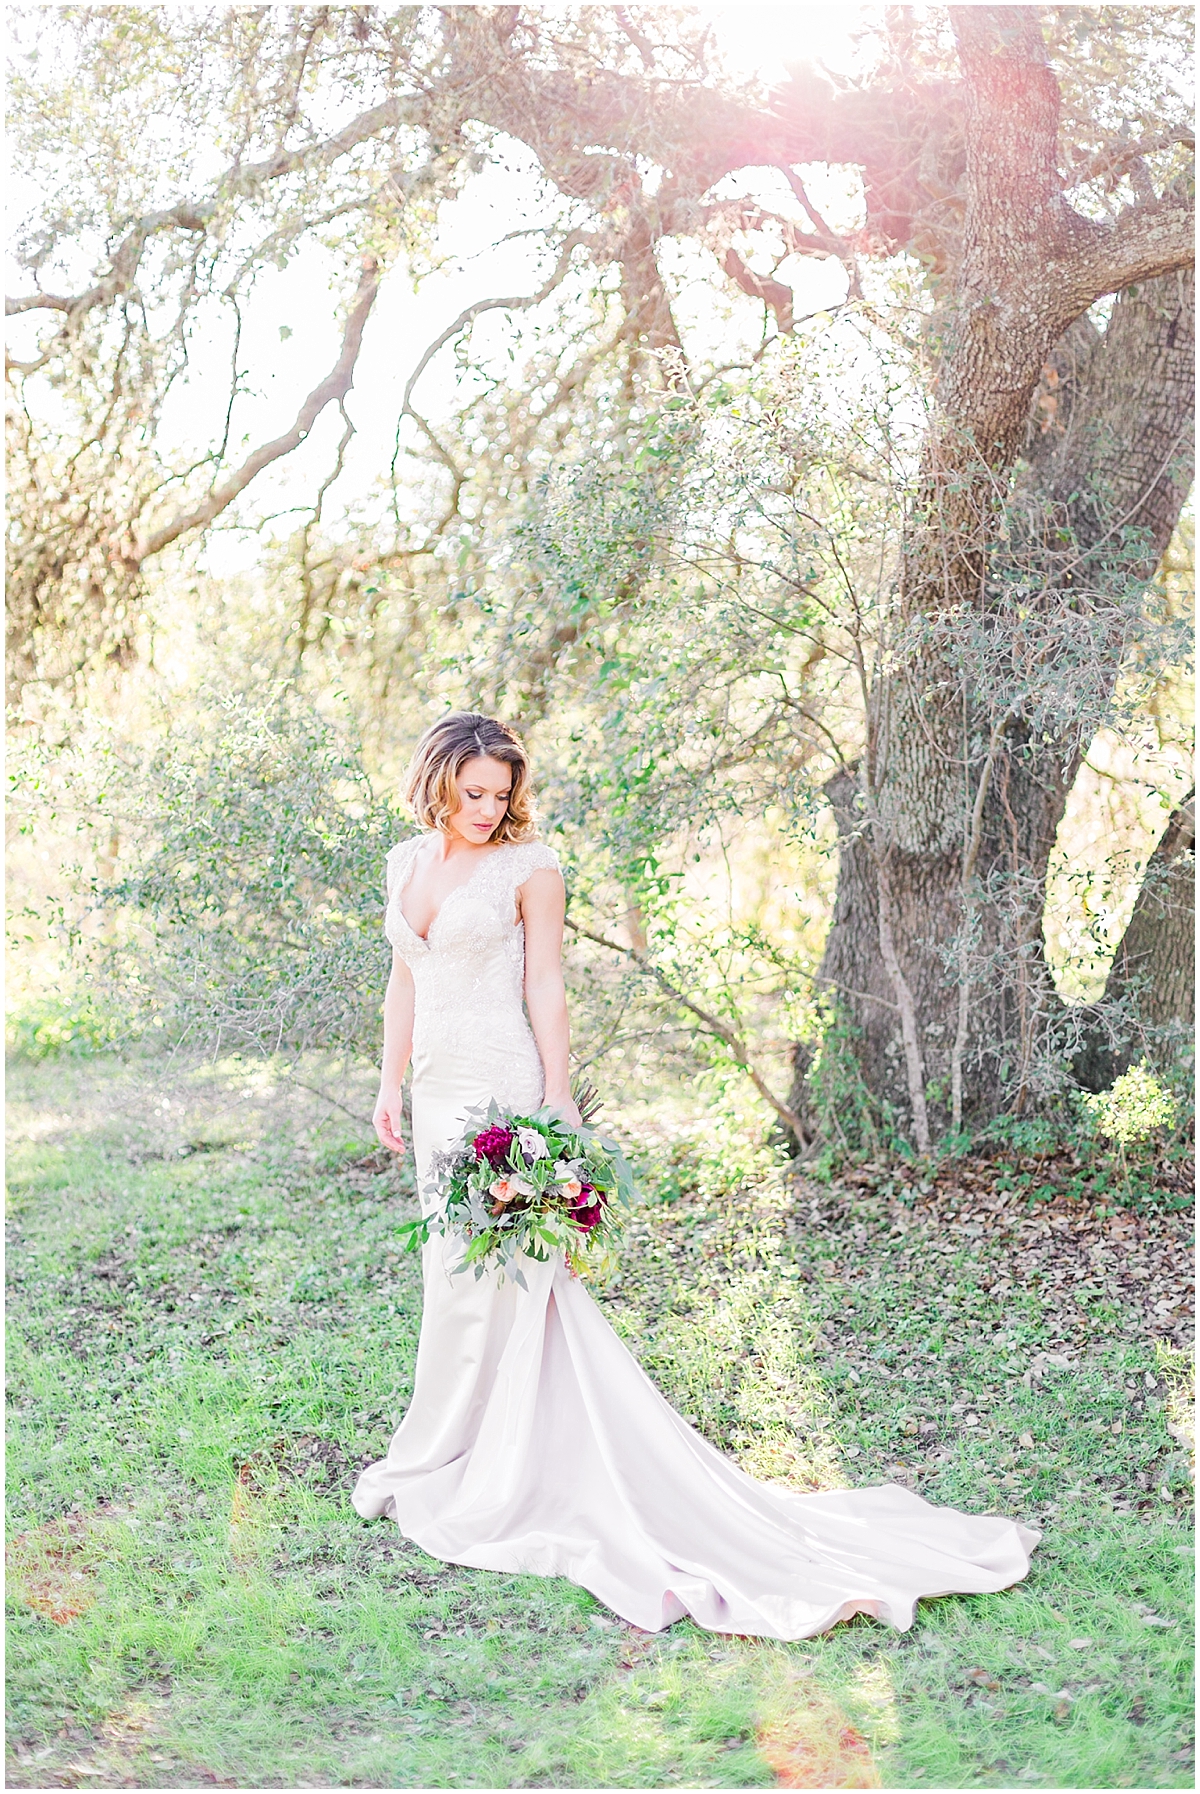 a-classic-modern-black-and-white-wedding-with-gold-accents-inspirational-shoot-at-pecan-springs-ranch-by-allison-jeffers-wedding-photography-dripping-springs-wedding-photographer_0042